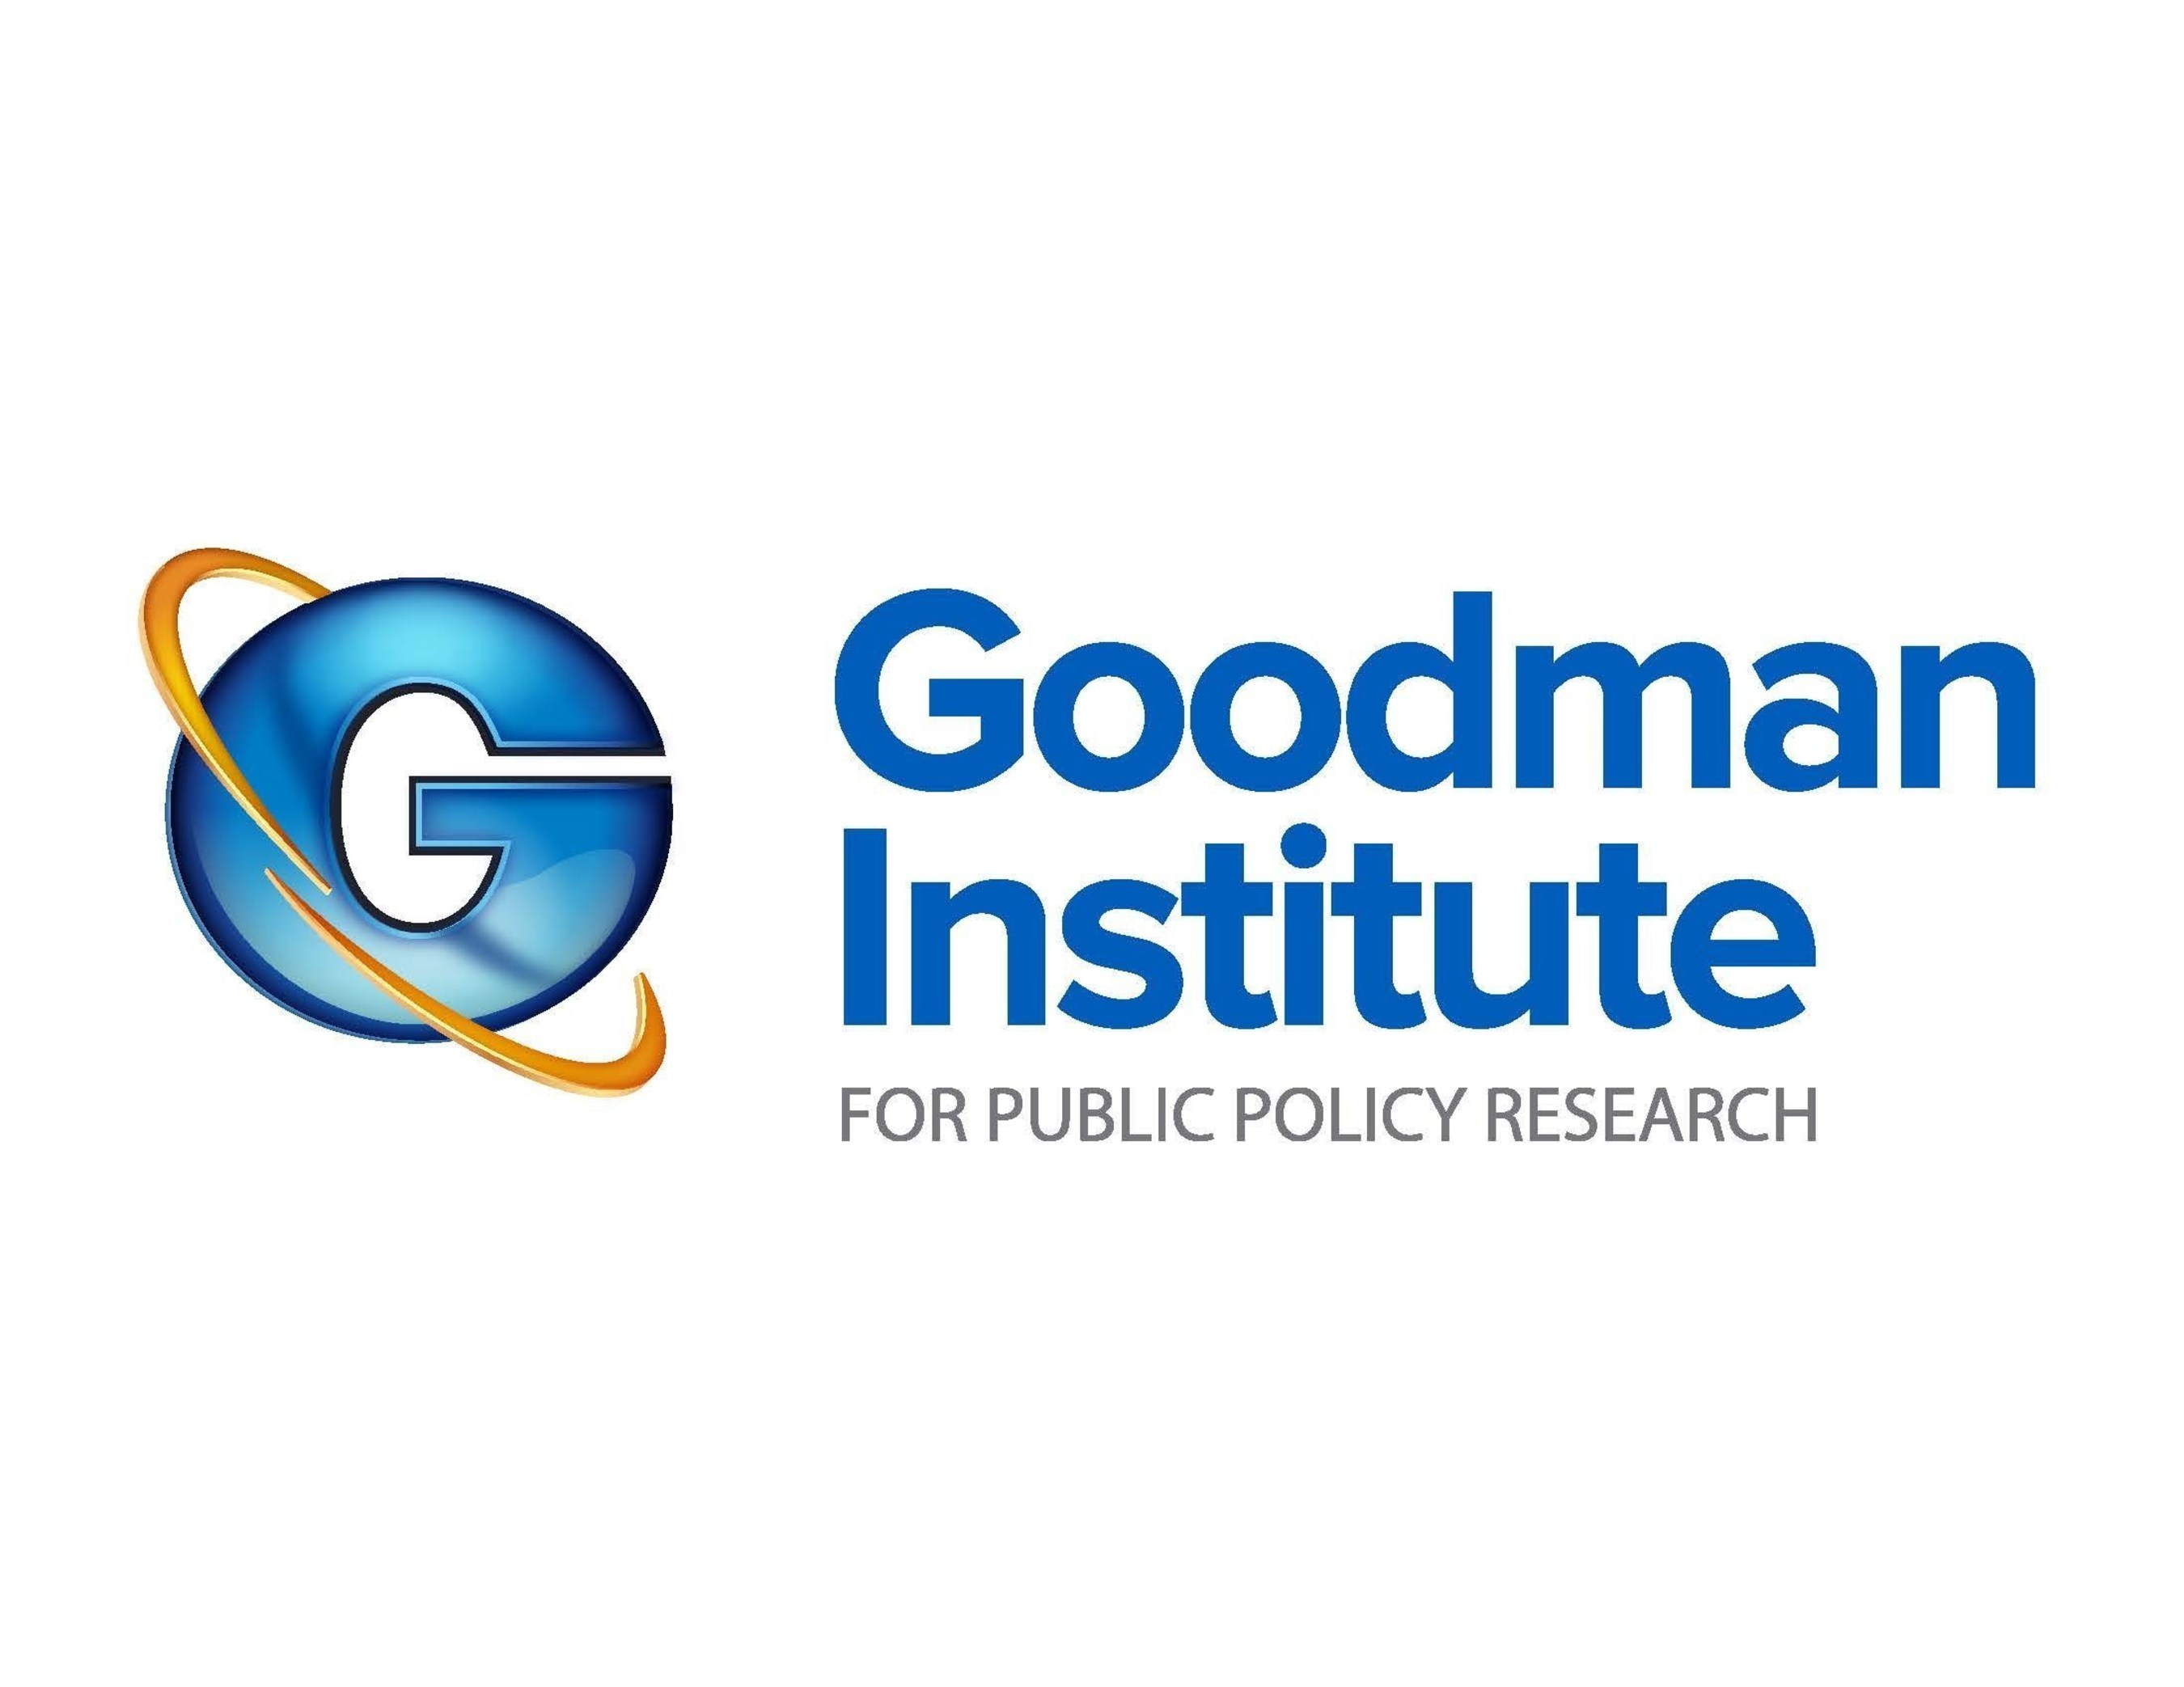 Goodman Institute for Public Policy Research